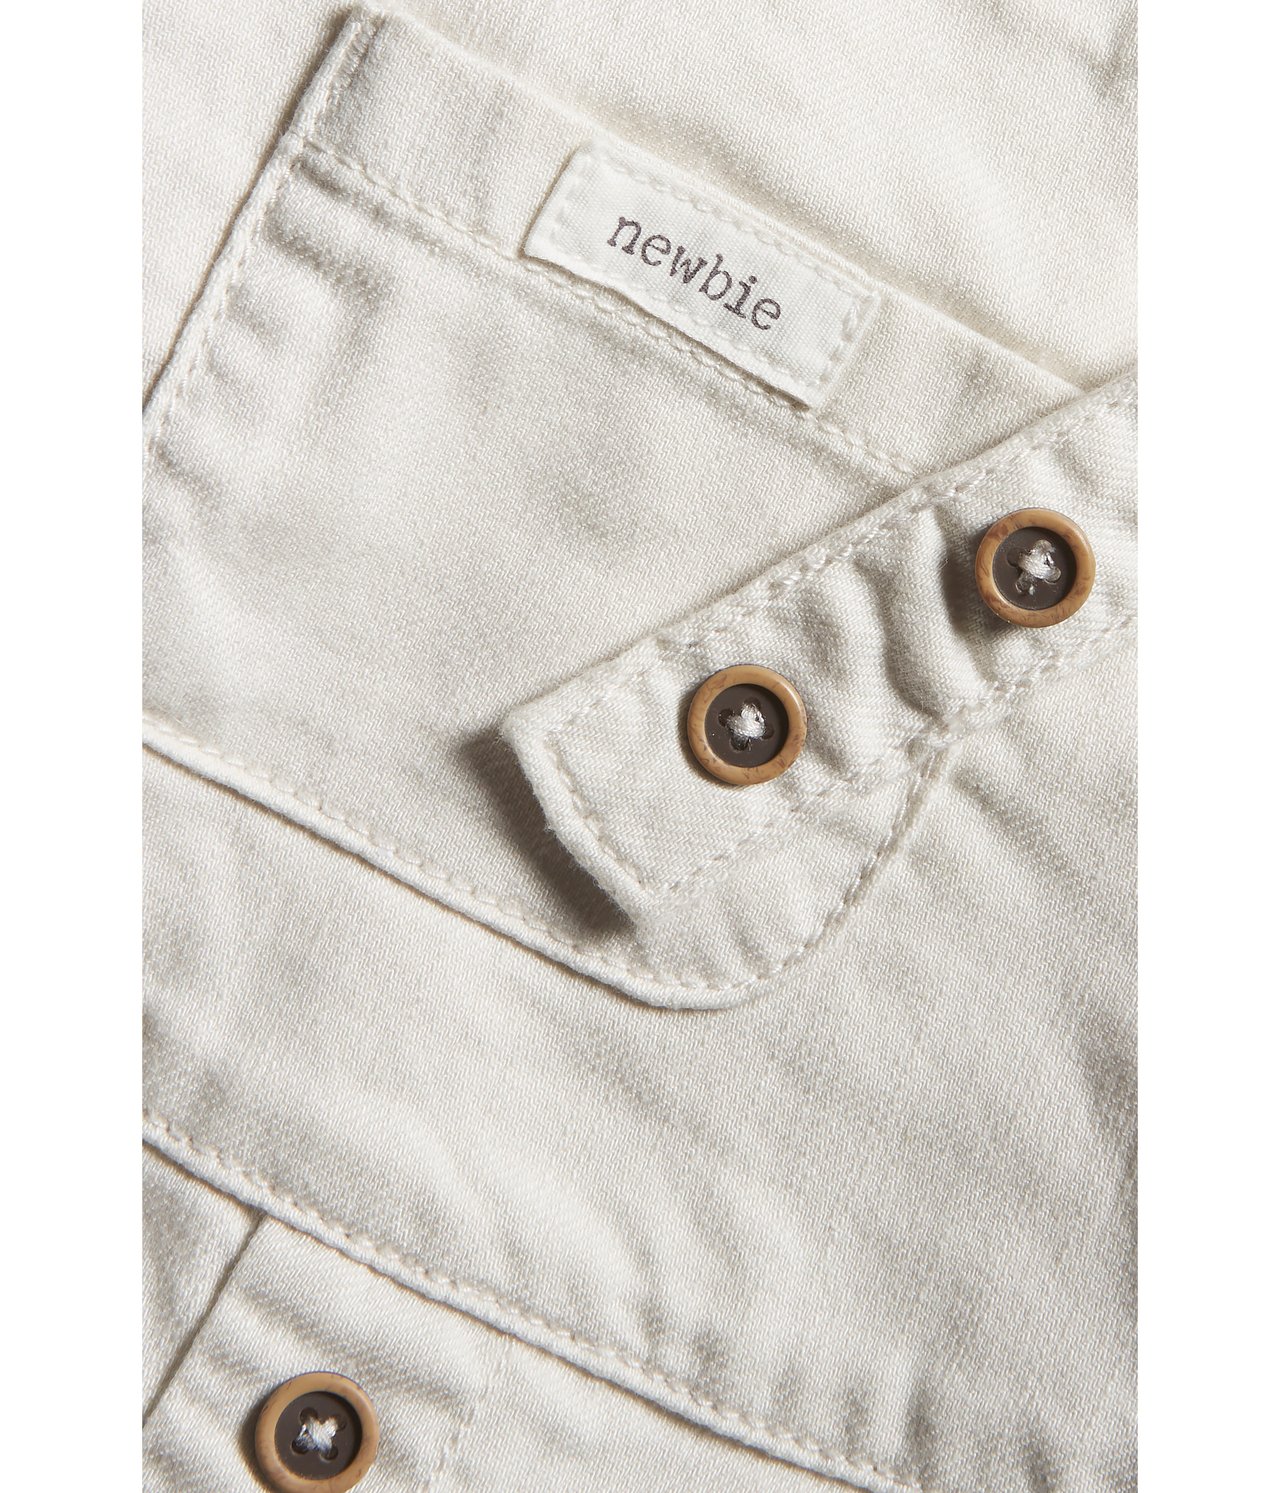 Hängselshorts baby Offwhite - null - 4